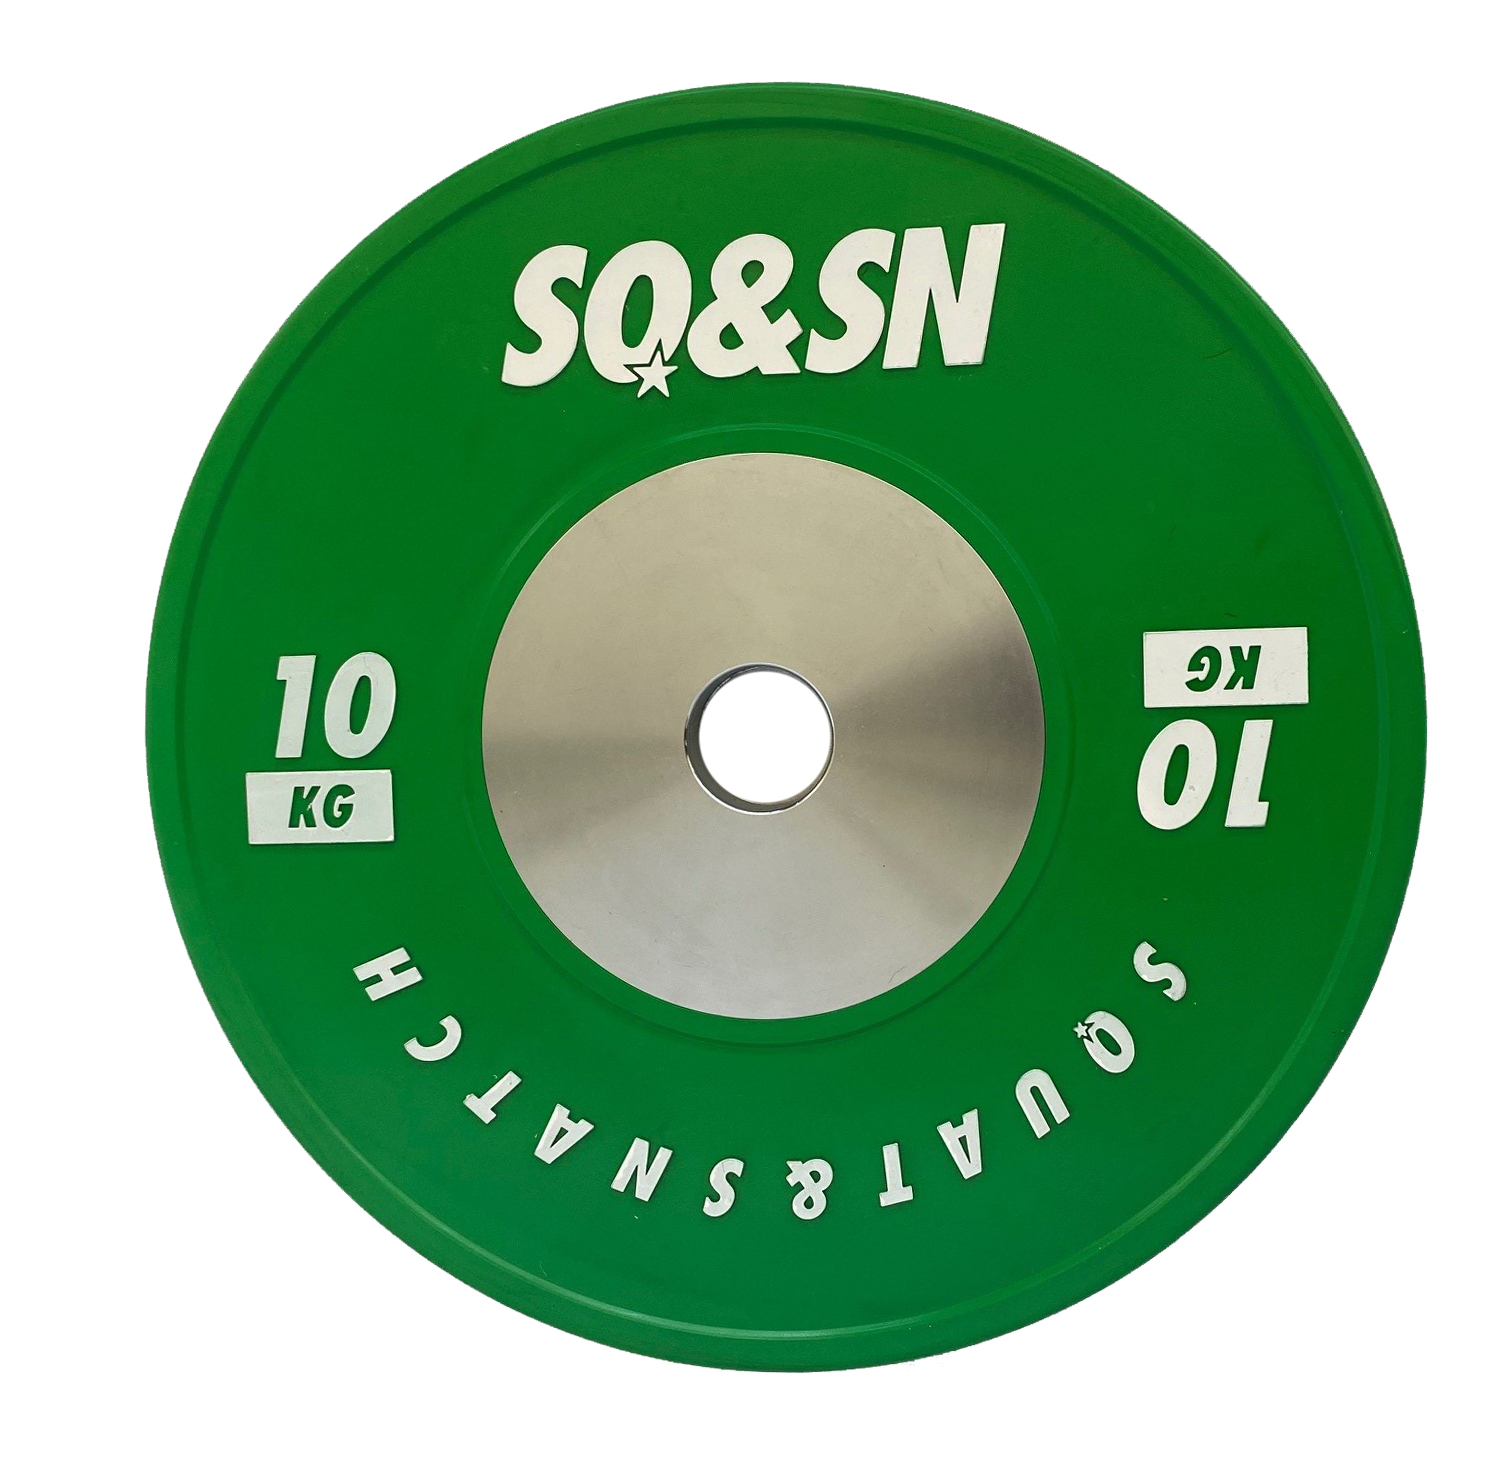 SQ&amp;SN Competition Bumper Plate 10 kg Green